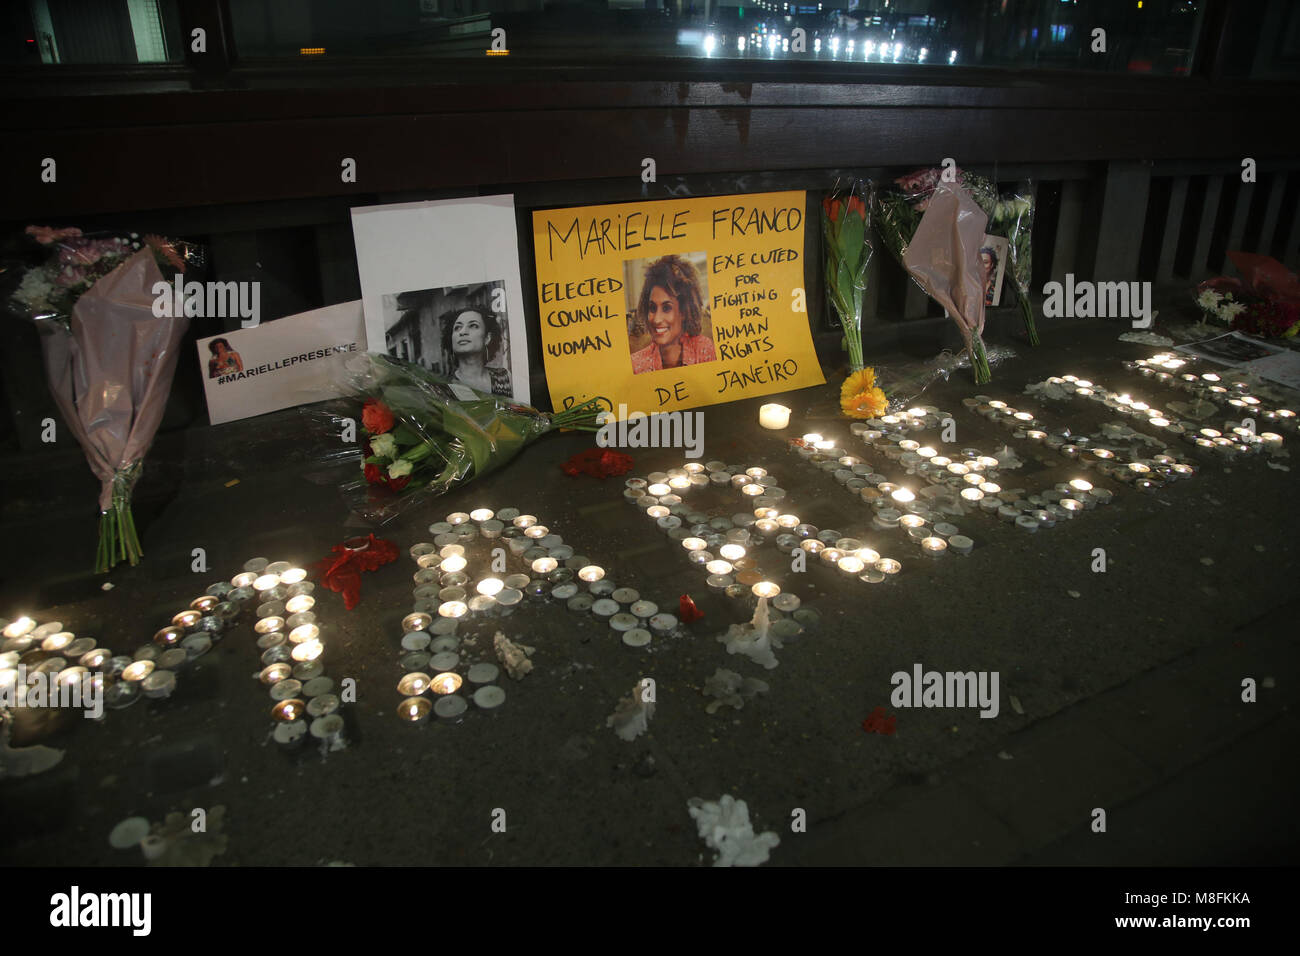 Tributes outside the Embassy of Brazil in London to Marielle Franco, 38, a Rio city councillor who was shot dead on Wednesday March 14 in downtown Rio de Janeiro, in an apparent targeted assassination. Stock Photo